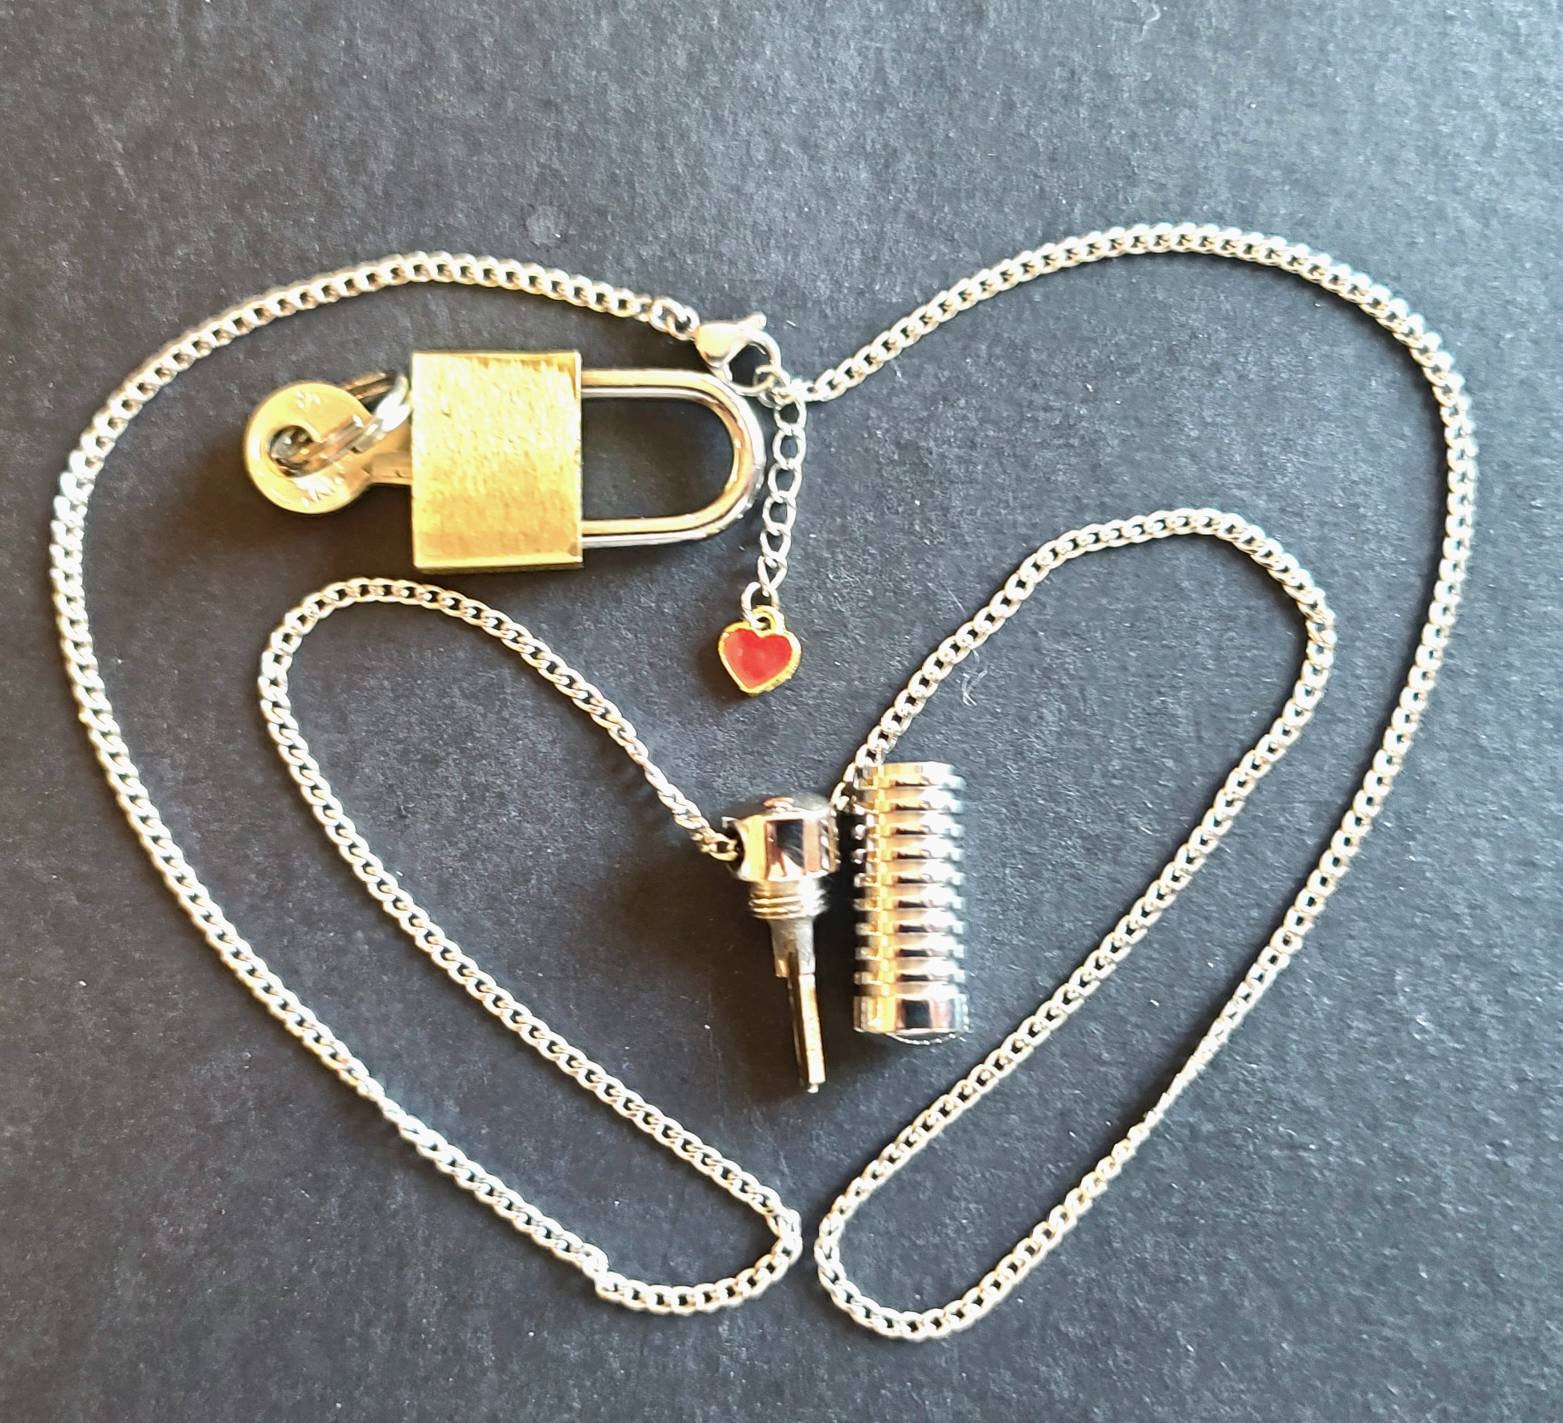 N055/kn the Knurled Secret Chastity Key Necklace This is a image